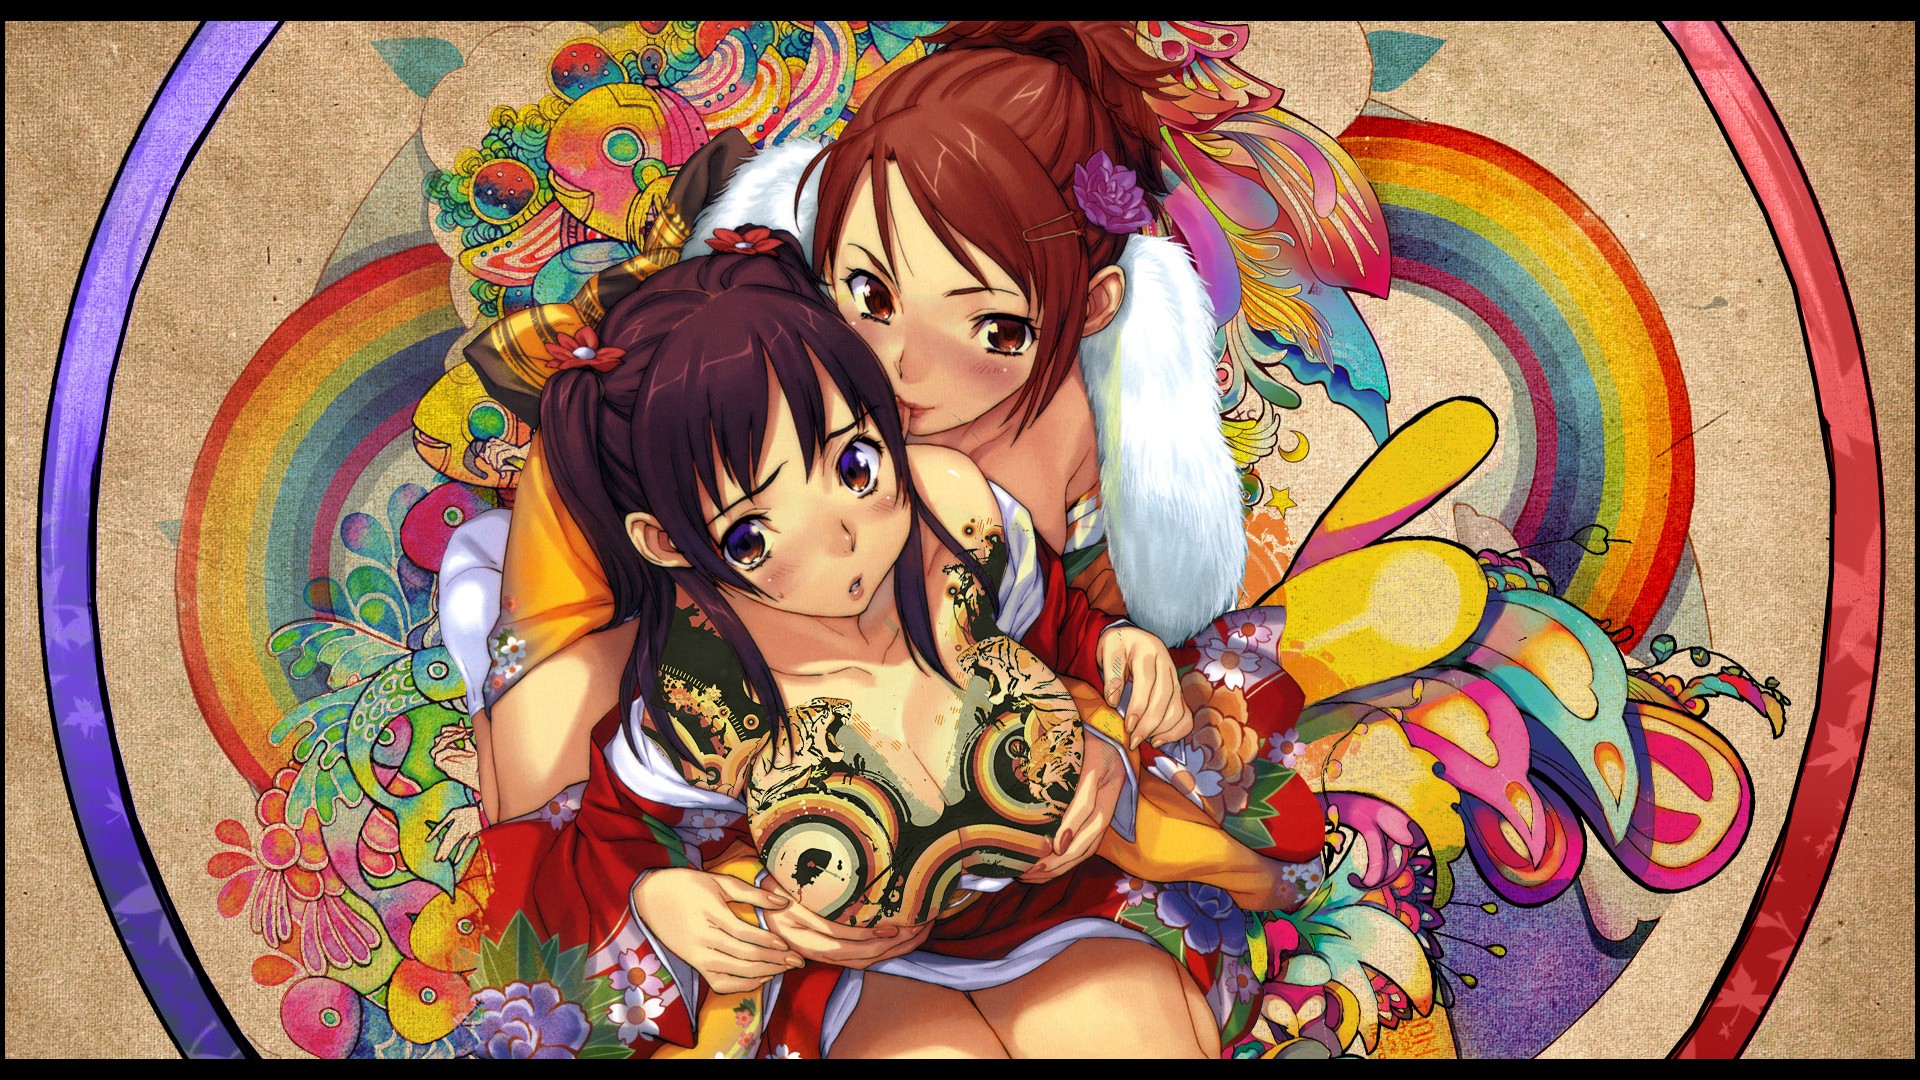 Anime 1920x1080 anime anime girls big boobs redhead hands on boobs two women boobs colorful brunette hand bra ecchi Tony Taka flower in hair huge breasts Snyp